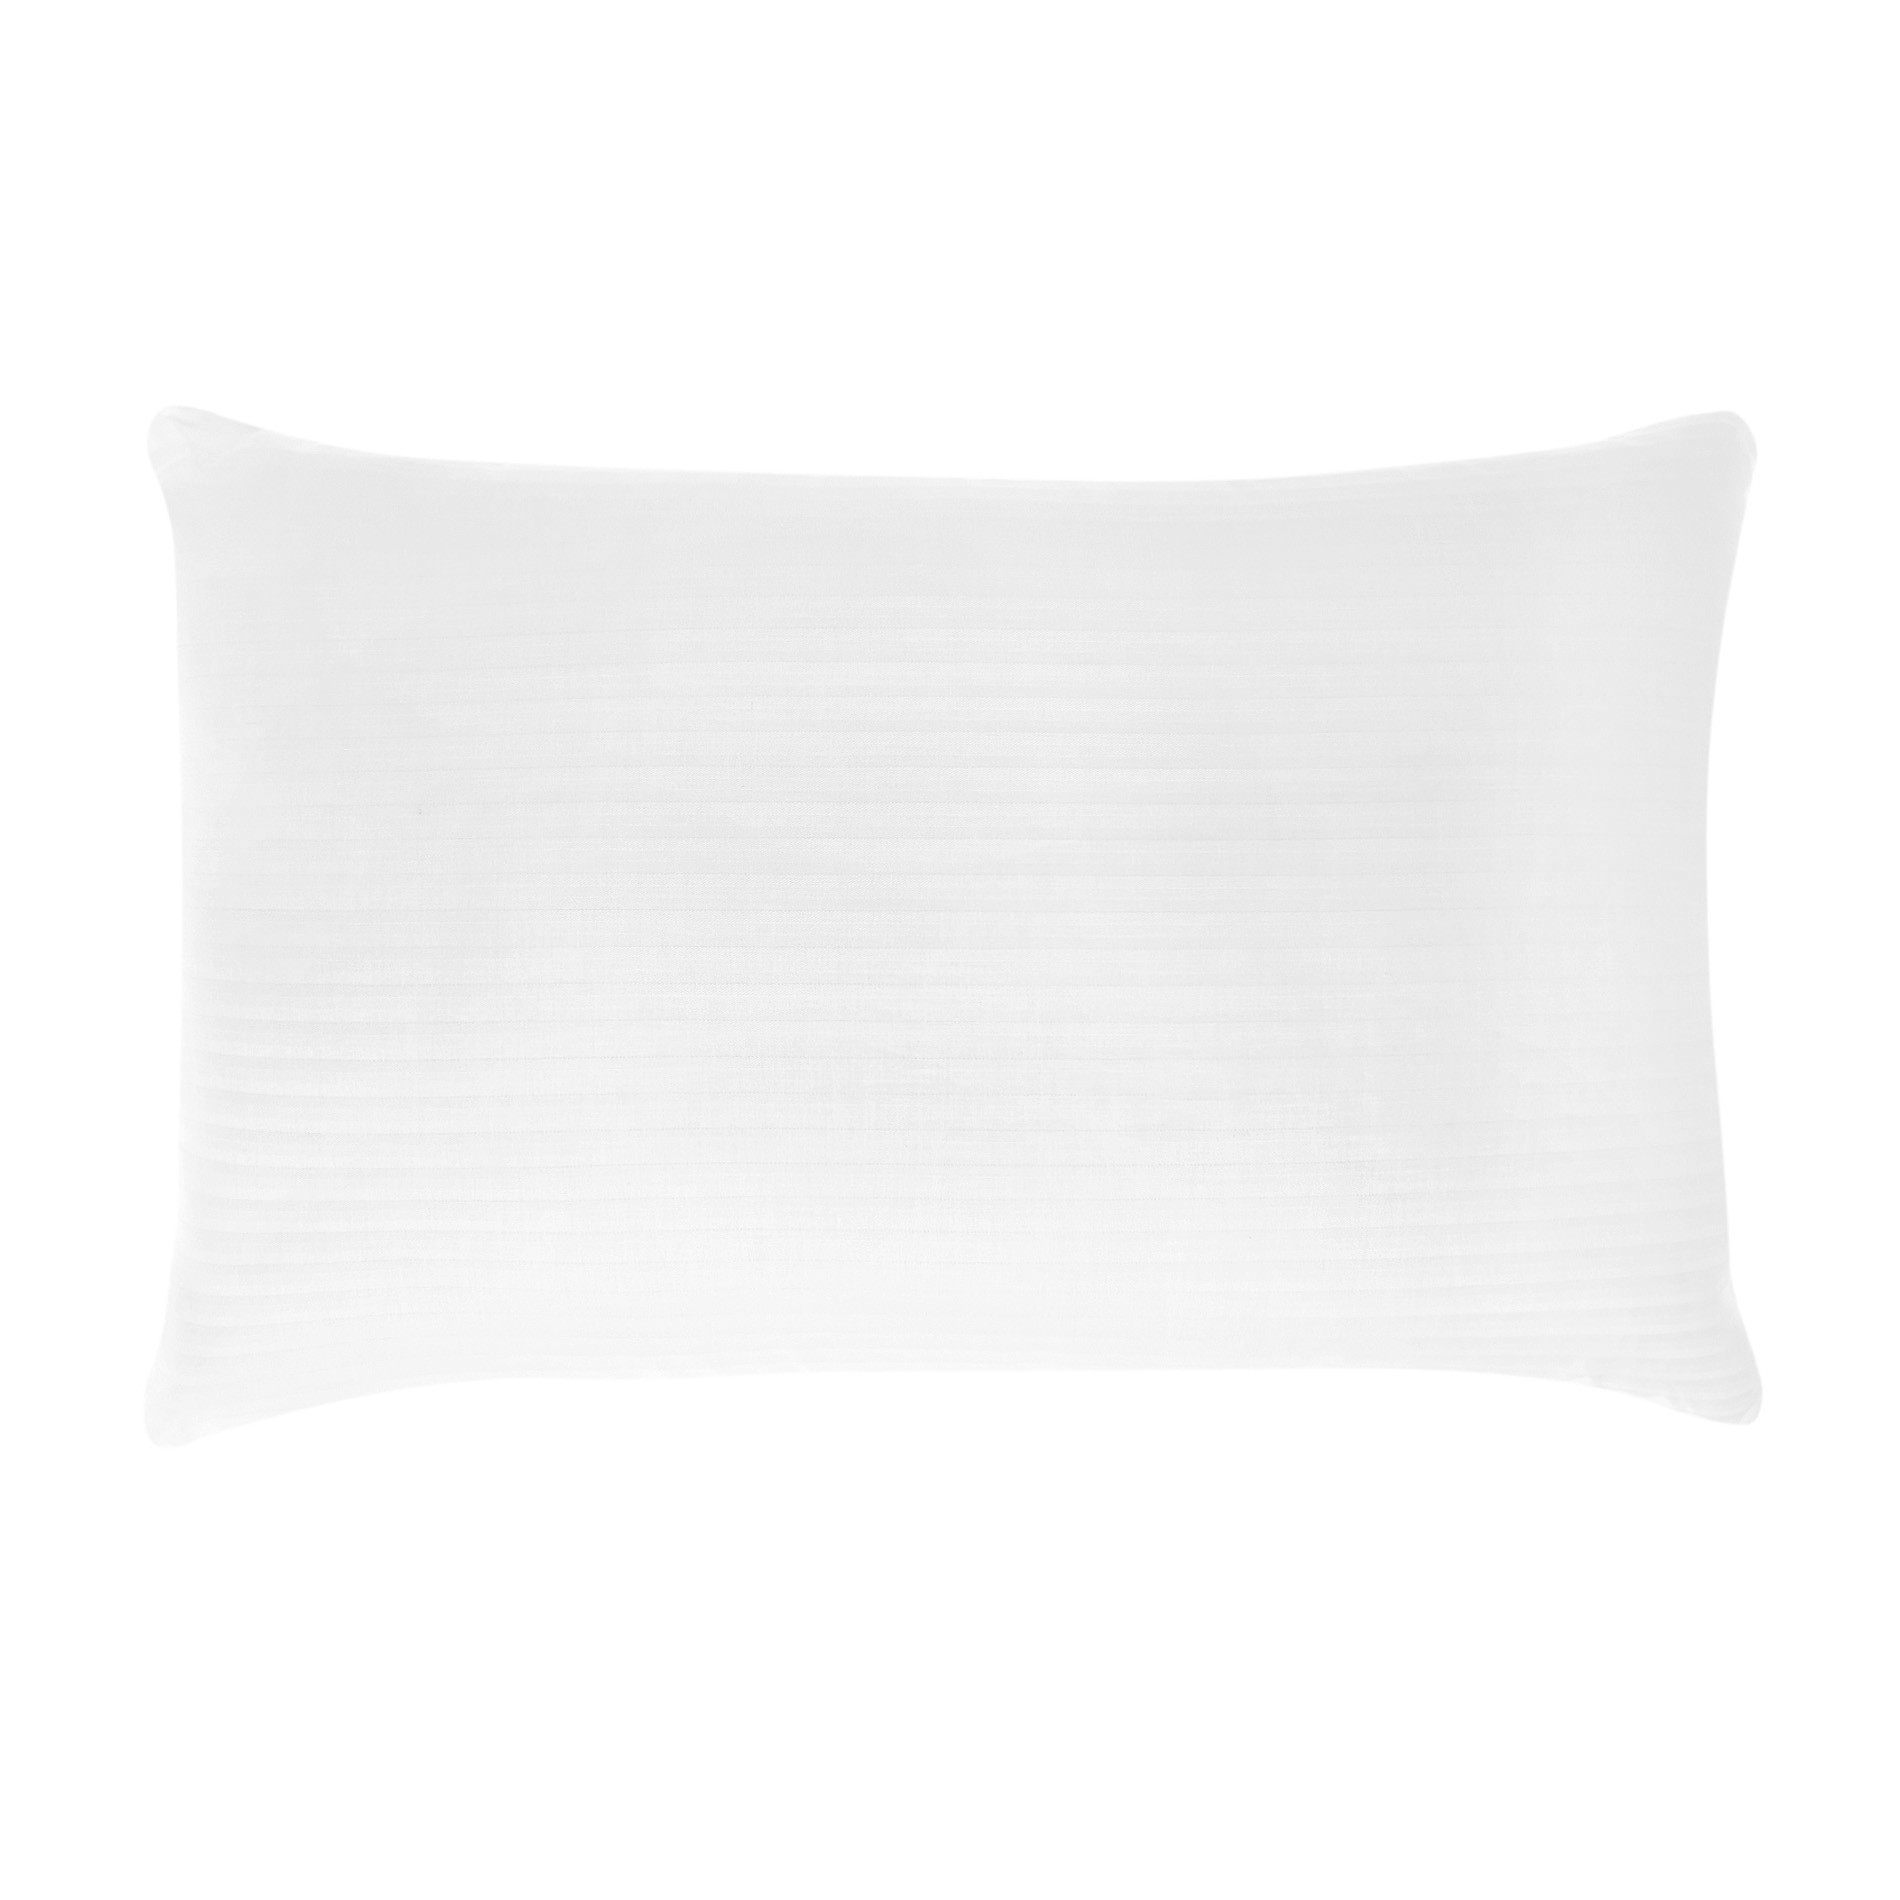 Dryfeel ventilated pillow, White, large image number 0